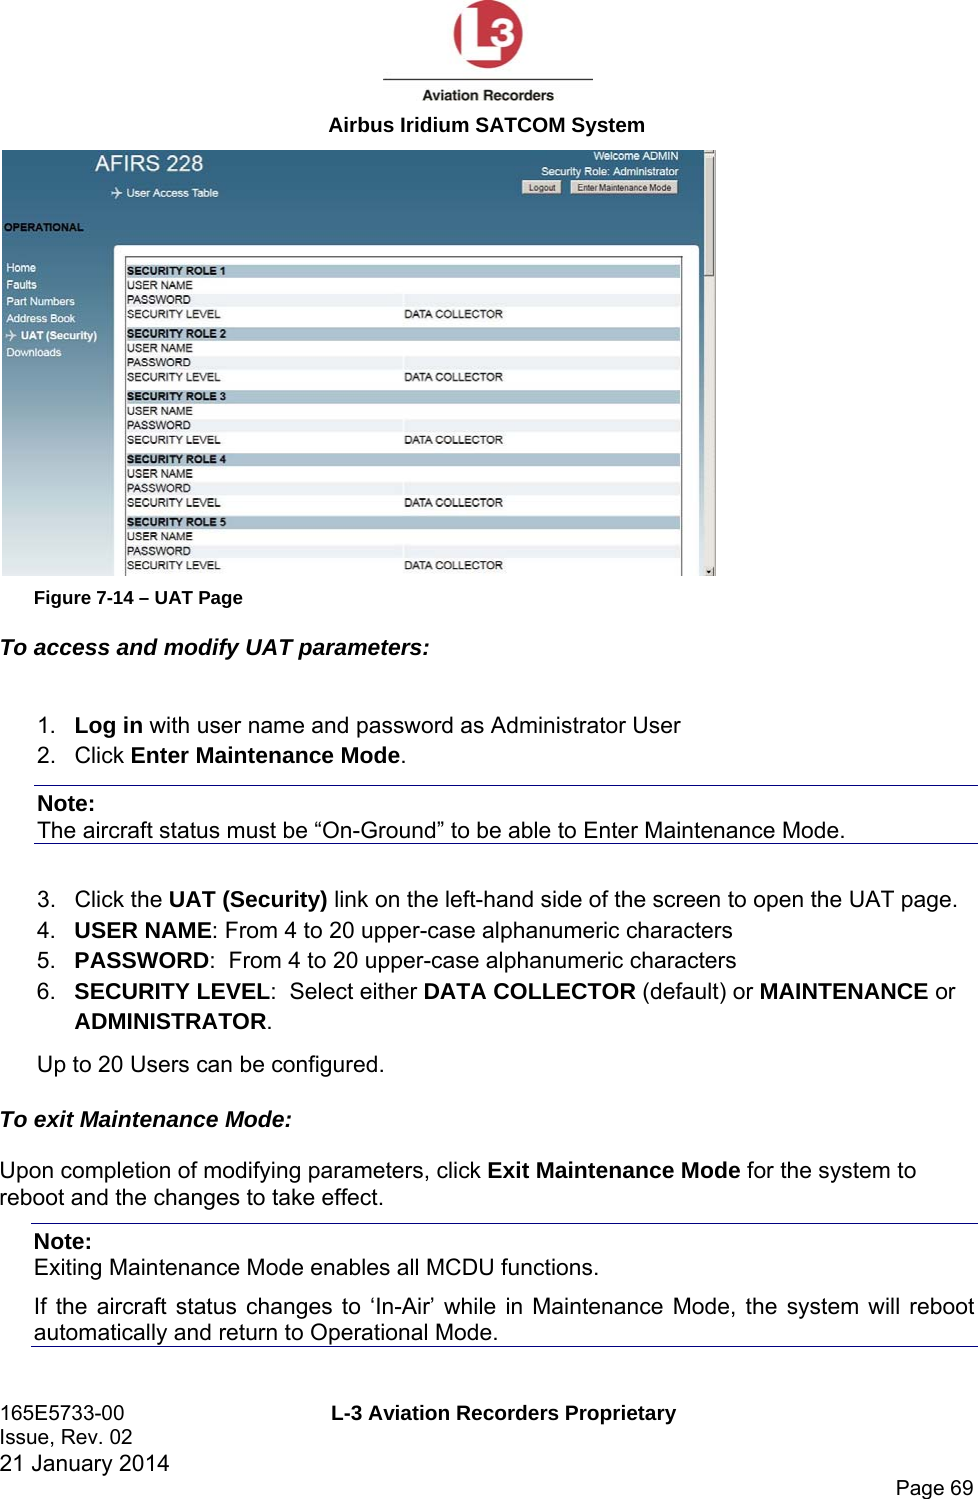  Airbus Iridium SATCOM System 165E5733-00  L-3 Aviation Recorders Proprietary Issue, Rev. 02   21 January 2014      Page 69  Figure 7-14 – UAT Page To access and modify UAT parameters:  1.  Log in with user name and password as Administrator User 2. Click Enter Maintenance Mode.   Note:  The aircraft status must be “On-Ground” to be able to Enter Maintenance Mode.  3. Click the UAT (Security) link on the left-hand side of the screen to open the UAT page. 4.  USER NAME: From 4 to 20 upper-case alphanumeric characters 5.  PASSWORD:  From 4 to 20 upper-case alphanumeric characters 6.  SECURITY LEVEL:  Select either DATA COLLECTOR (default) or MAINTENANCE or ADMINISTRATOR.   Up to 20 Users can be configured. To exit Maintenance Mode: Upon completion of modifying parameters, click Exit Maintenance Mode for the system to reboot and the changes to take effect. Note:  Exiting Maintenance Mode enables all MCDU functions.  If the aircraft status changes to ‘In-Air’ while in Maintenance Mode, the system will reboot automatically and return to Operational Mode.  